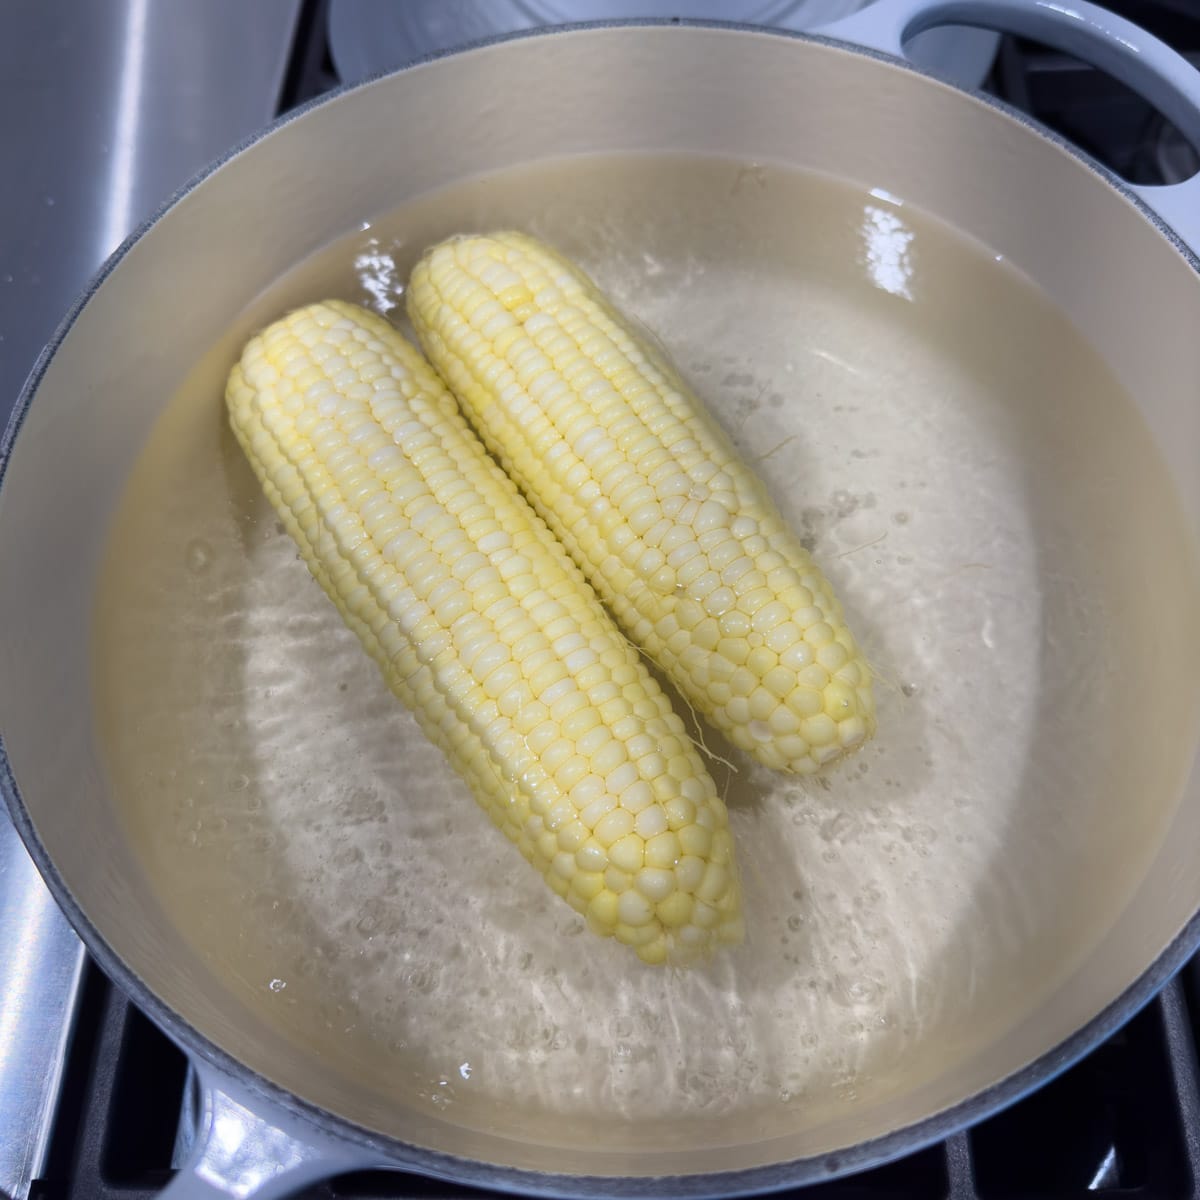 Corn cobs cooking in boiling water on stovetop.